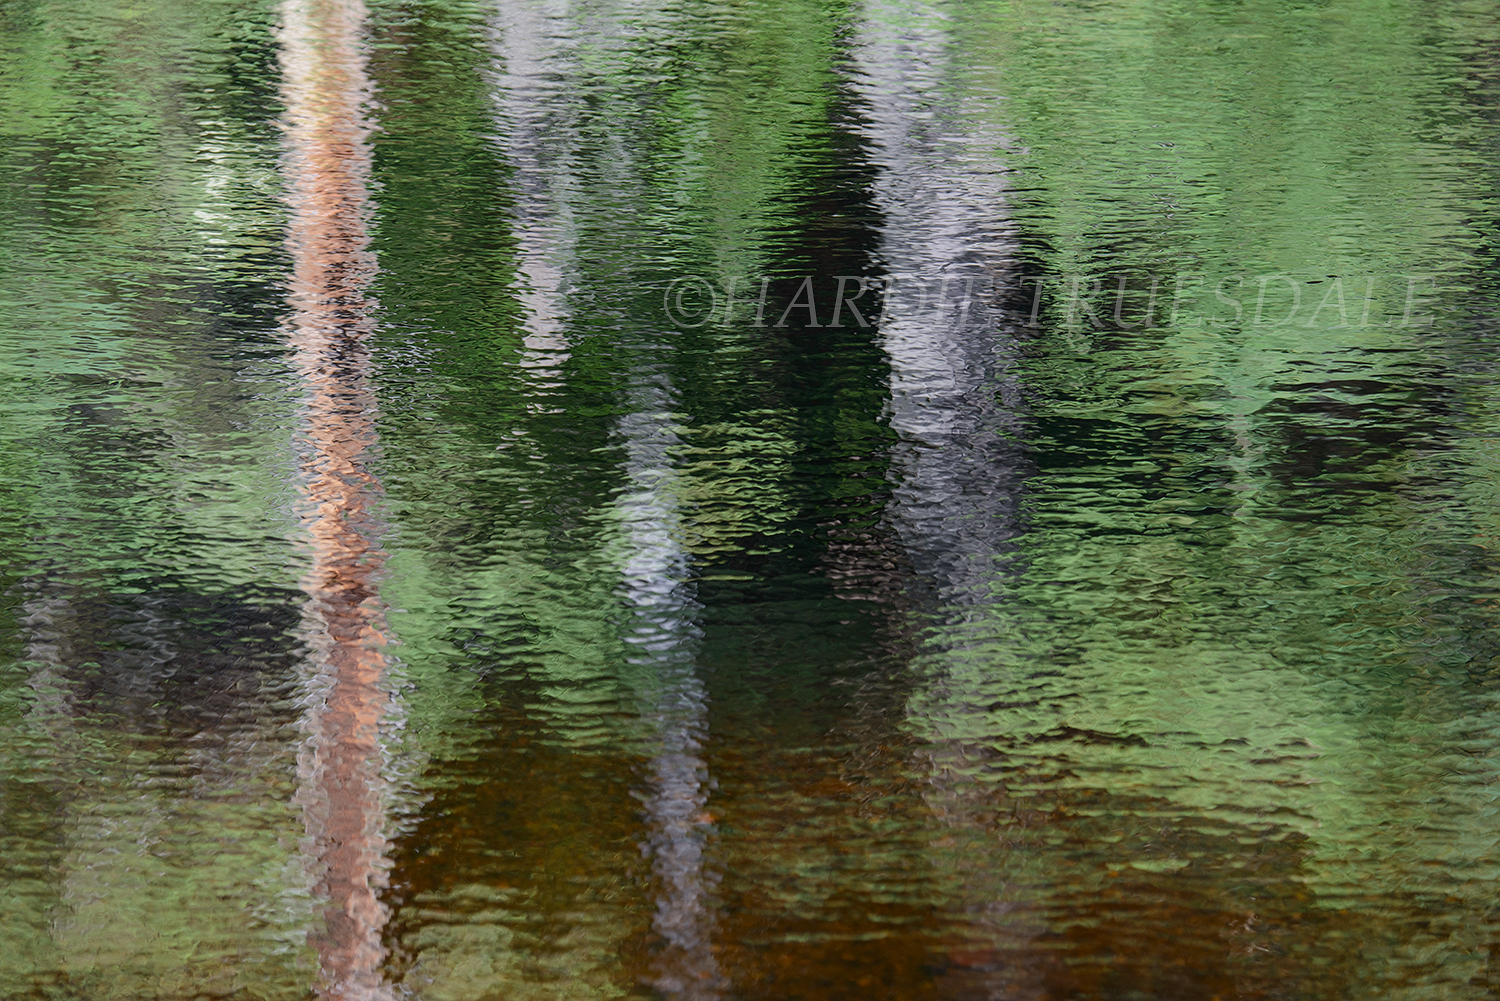  MN#168 "Cross River Reflections" 